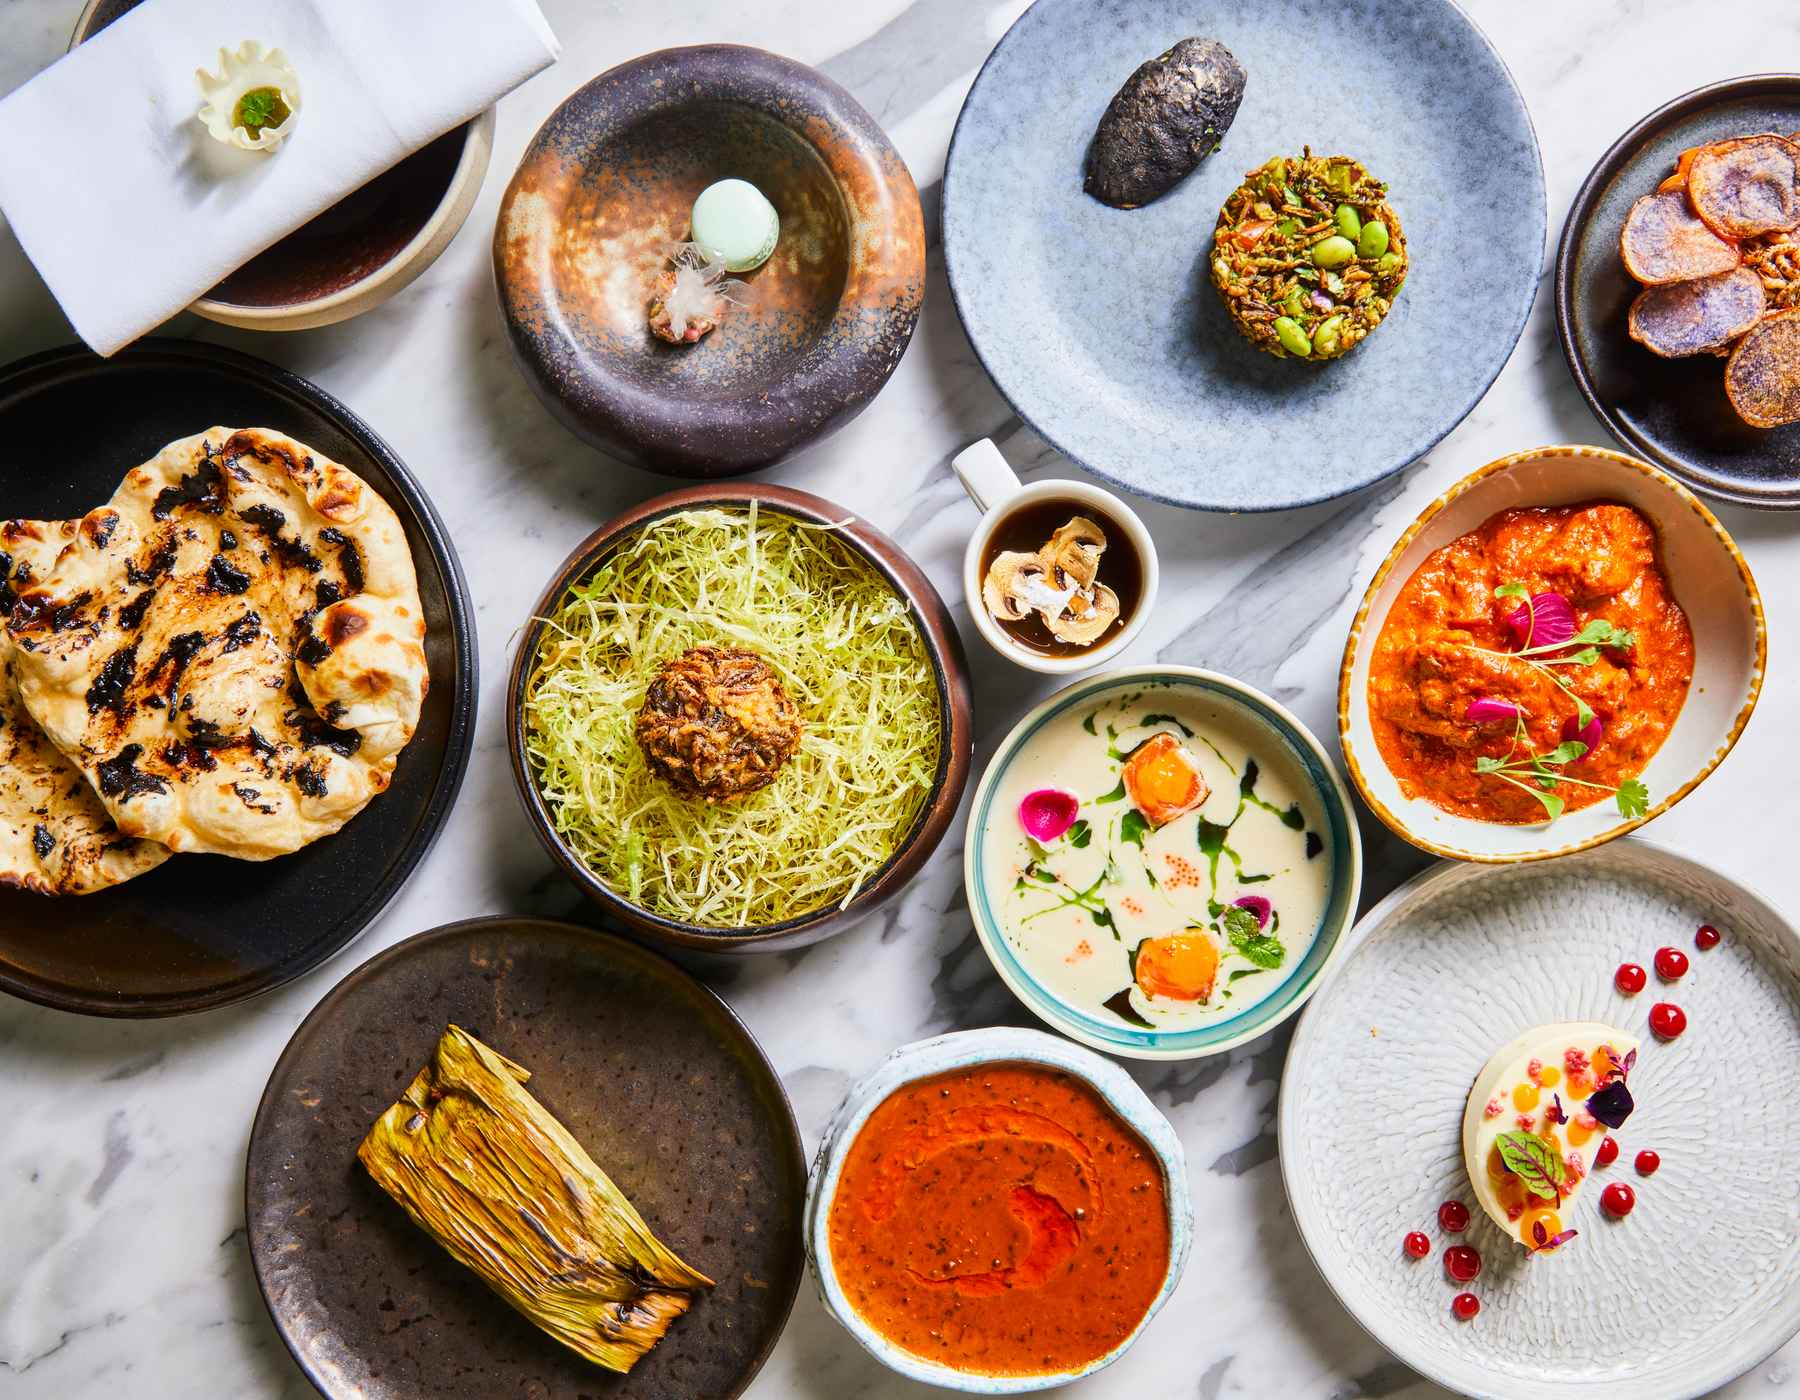 Turn up the heat at First Table’s Indian hot spots